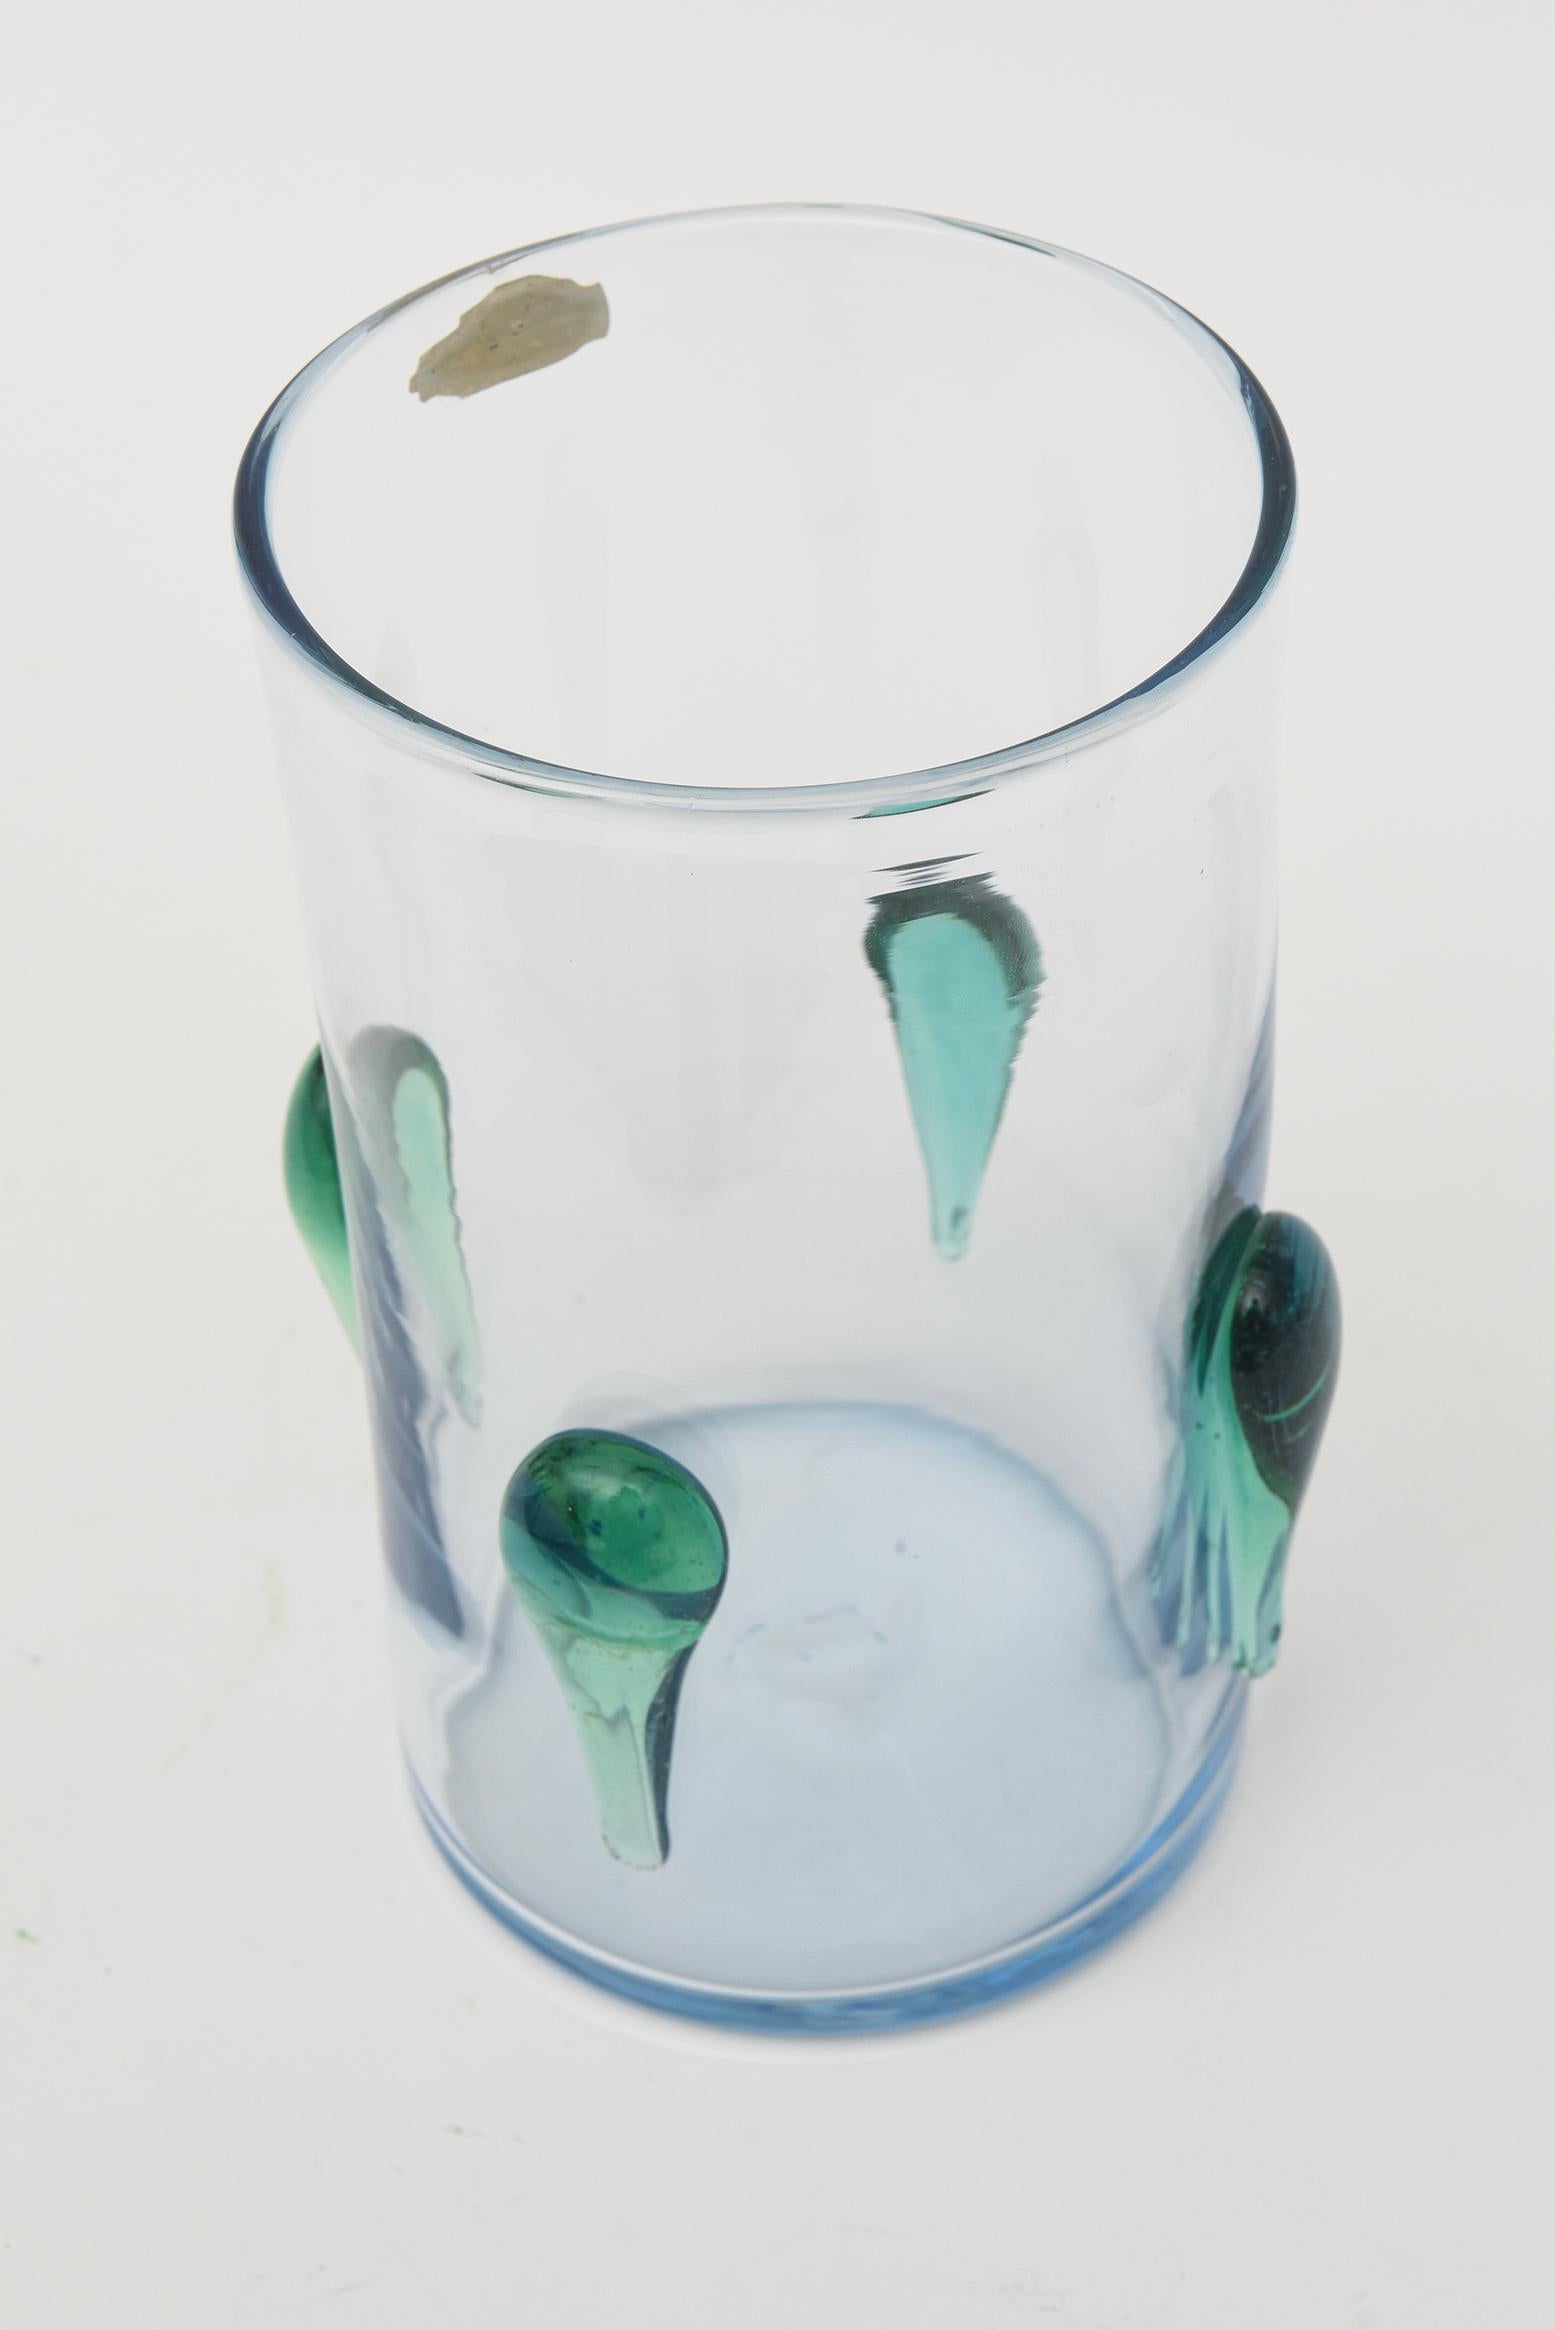 This vintage Blenko glass vase from the 60's has the original paper sticker on it from the time period. The clear glass cylinder vase has 4 applied dimensional teardrop forms surround. The colors are a combination sea green infused with a light